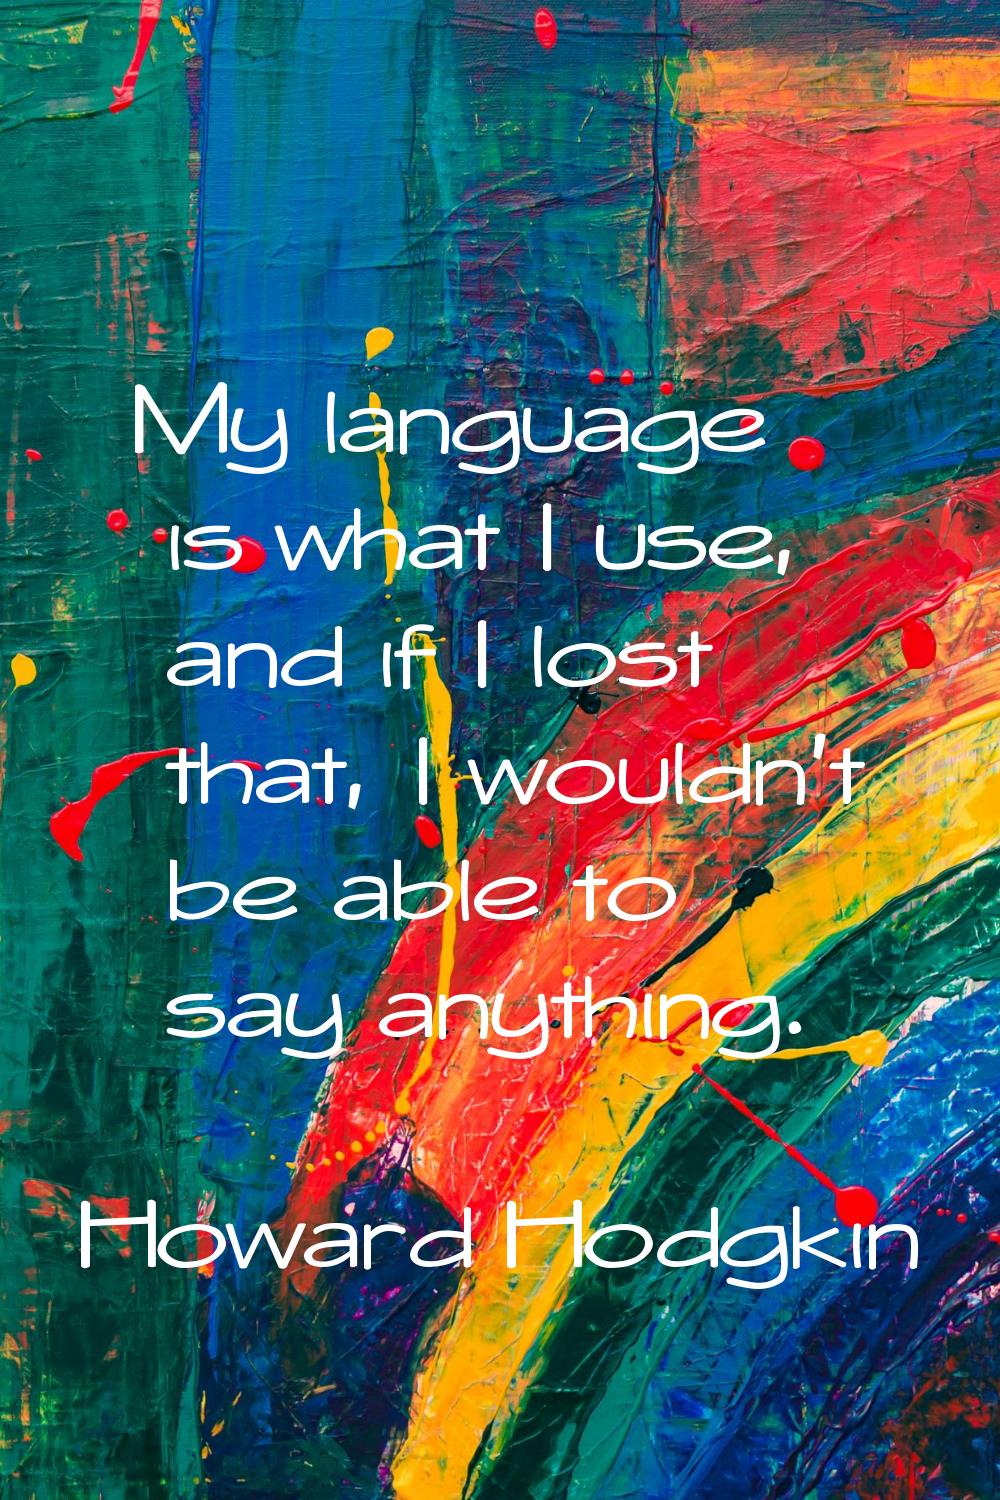 My language is what I use, and if I lost that, I wouldn't be able to say anything.